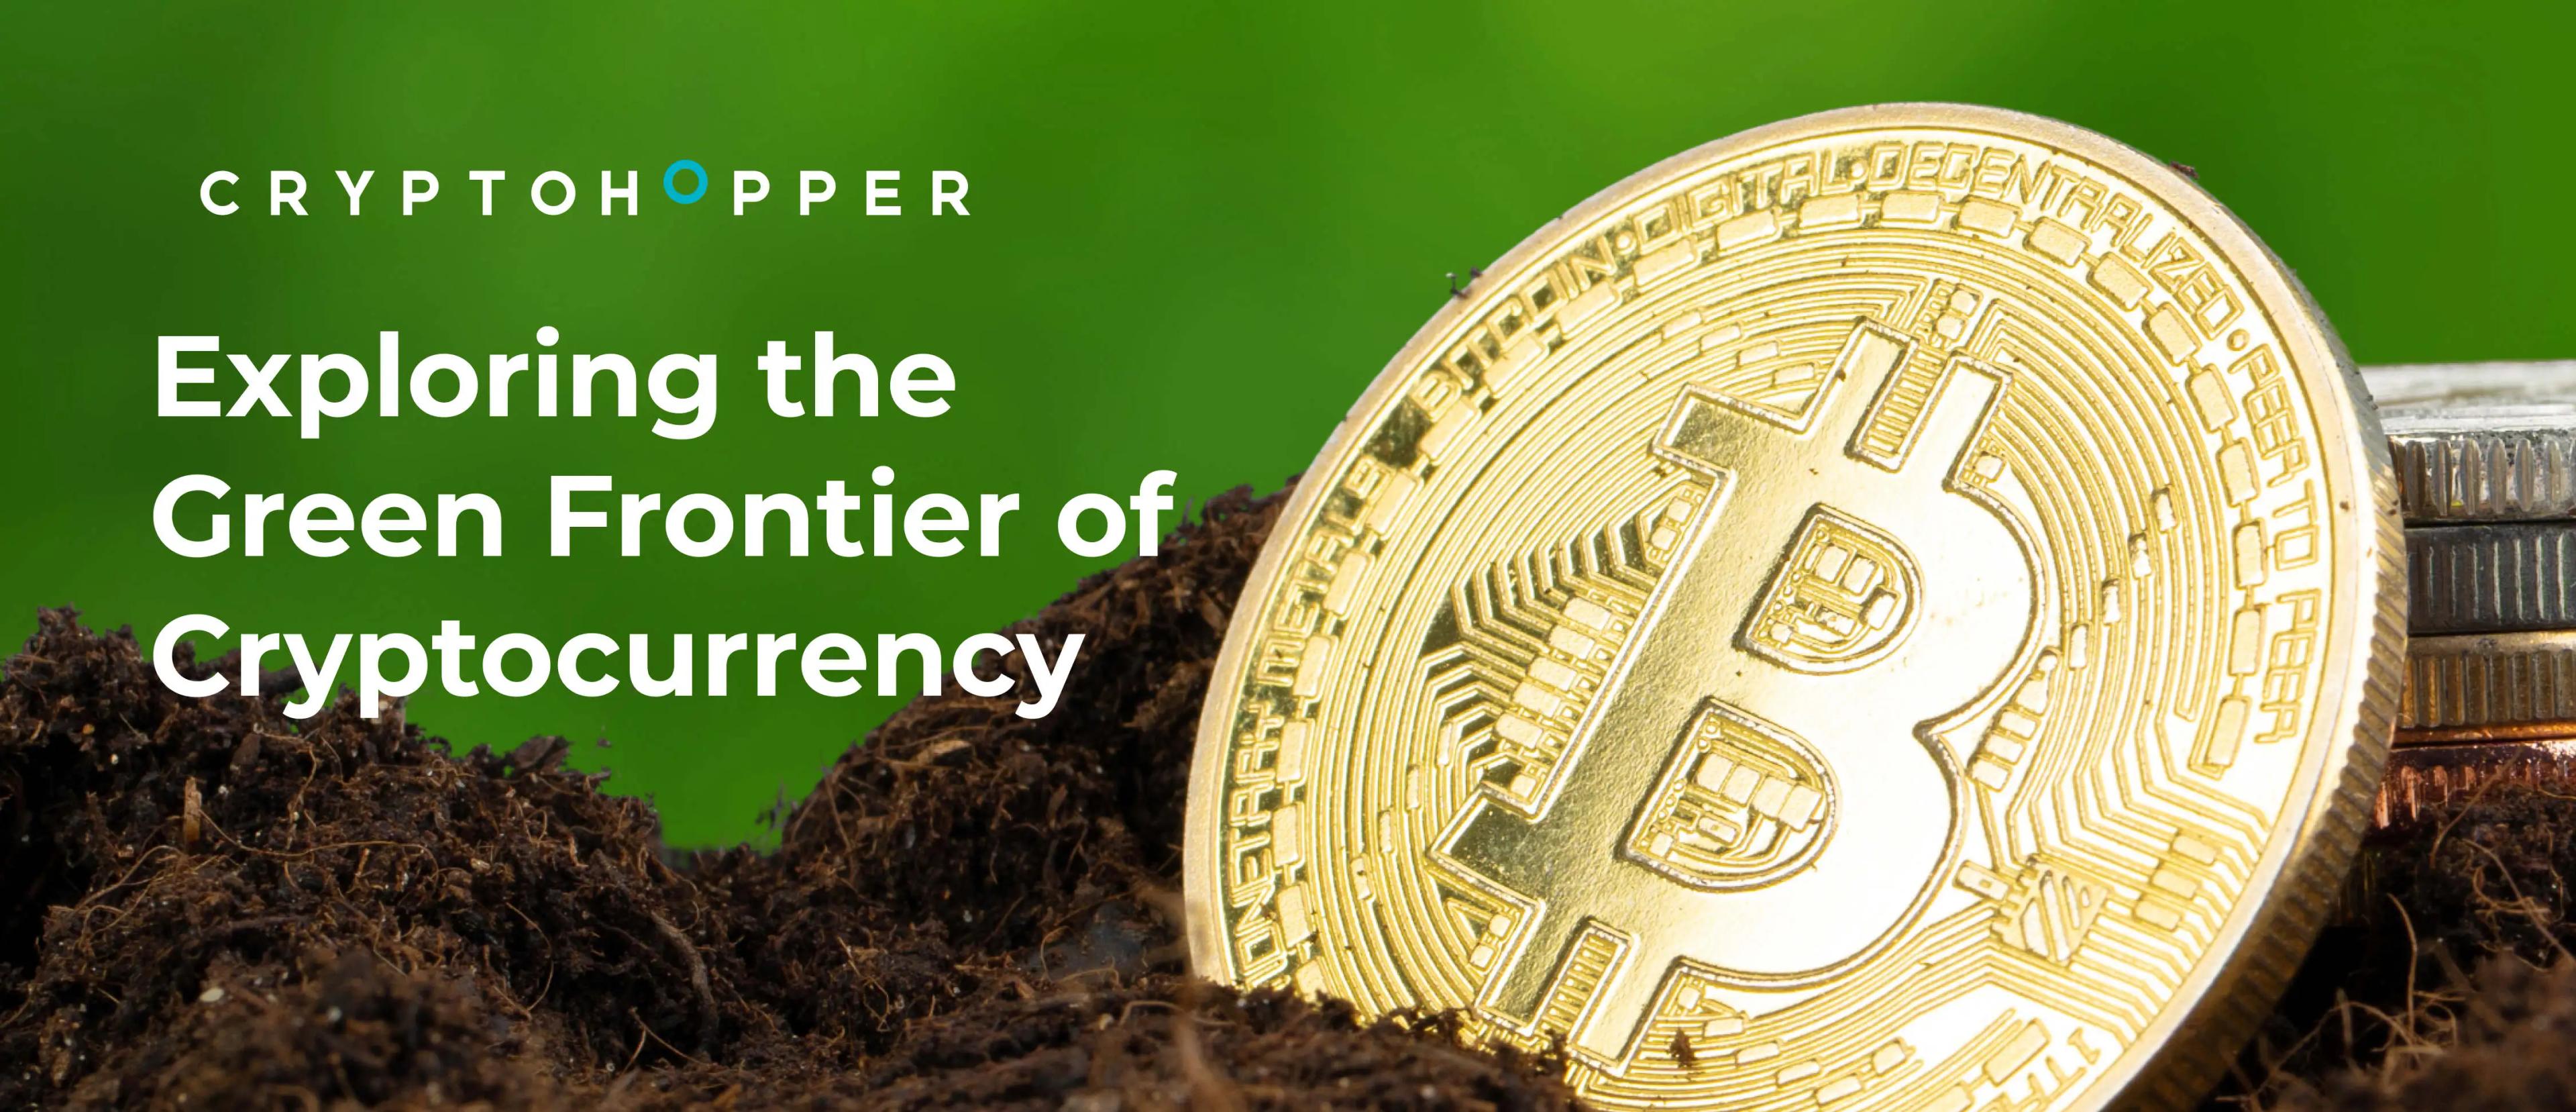 Embracing Sustainability: Exploring the Green Frontier of Cryptocurrency